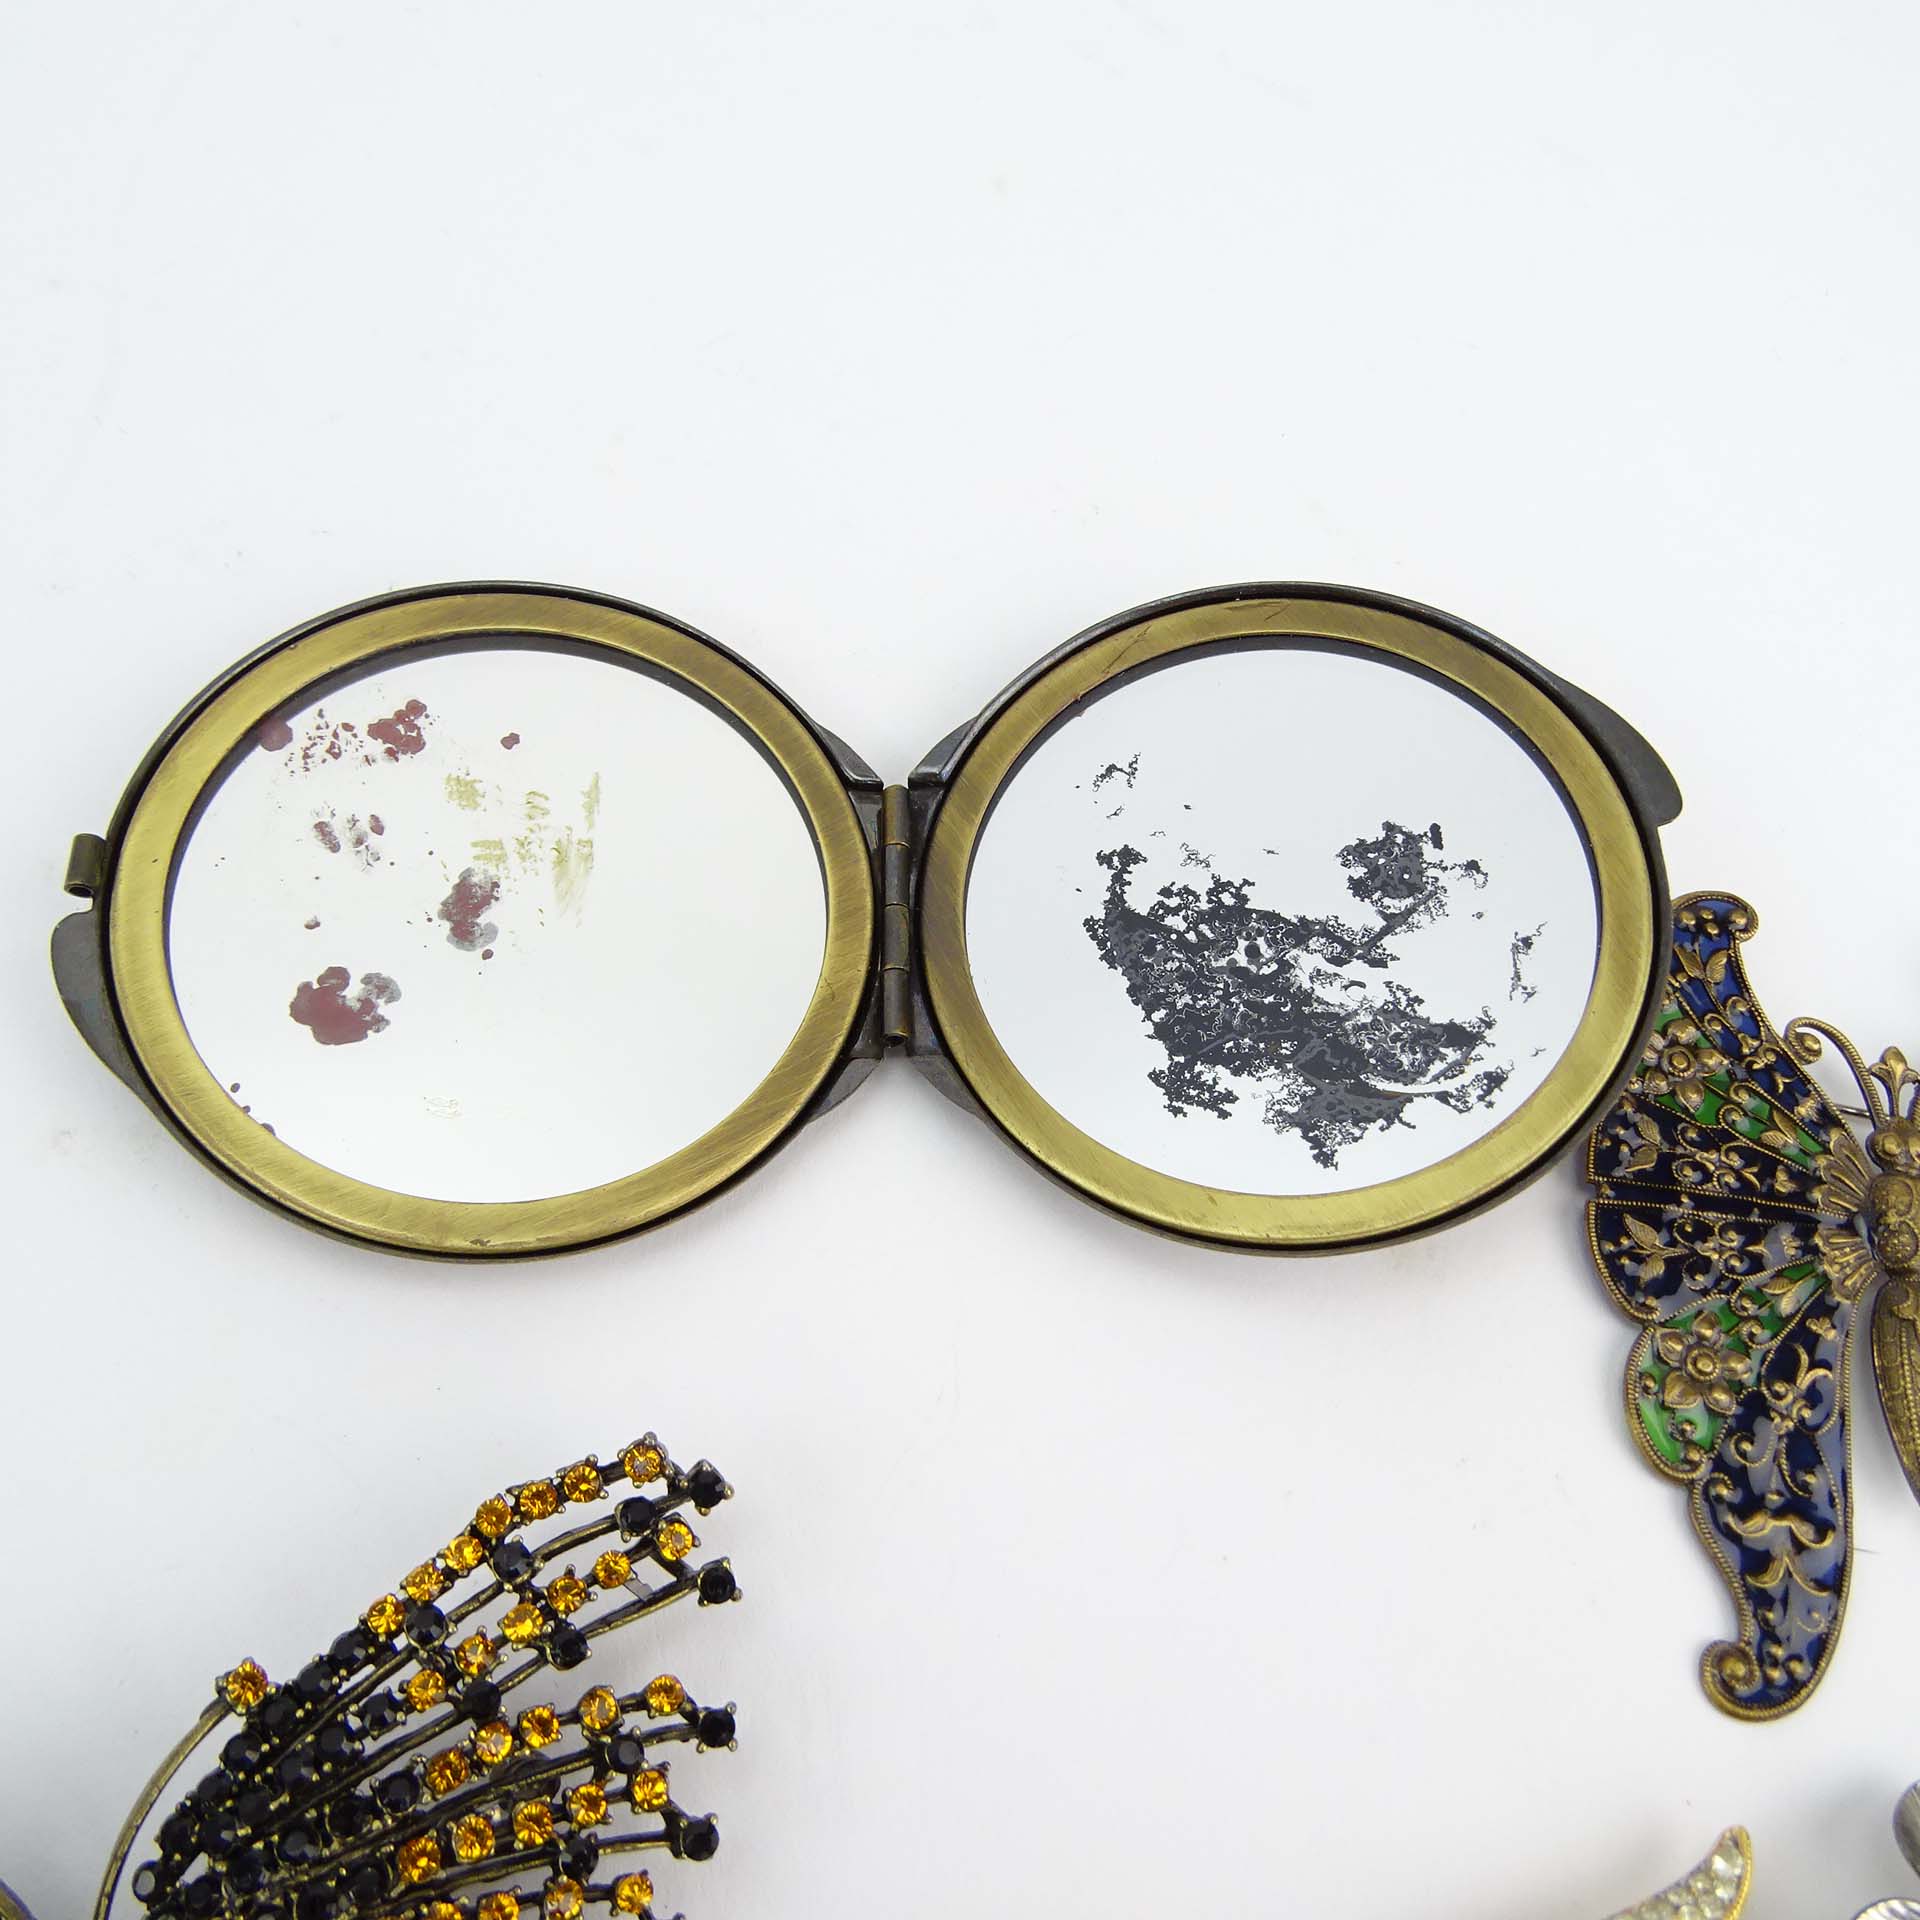 Collection of Fifteen (15) Fashion Butterfly Brooches and One (1) Compact variously with enamel and faux gem stones.